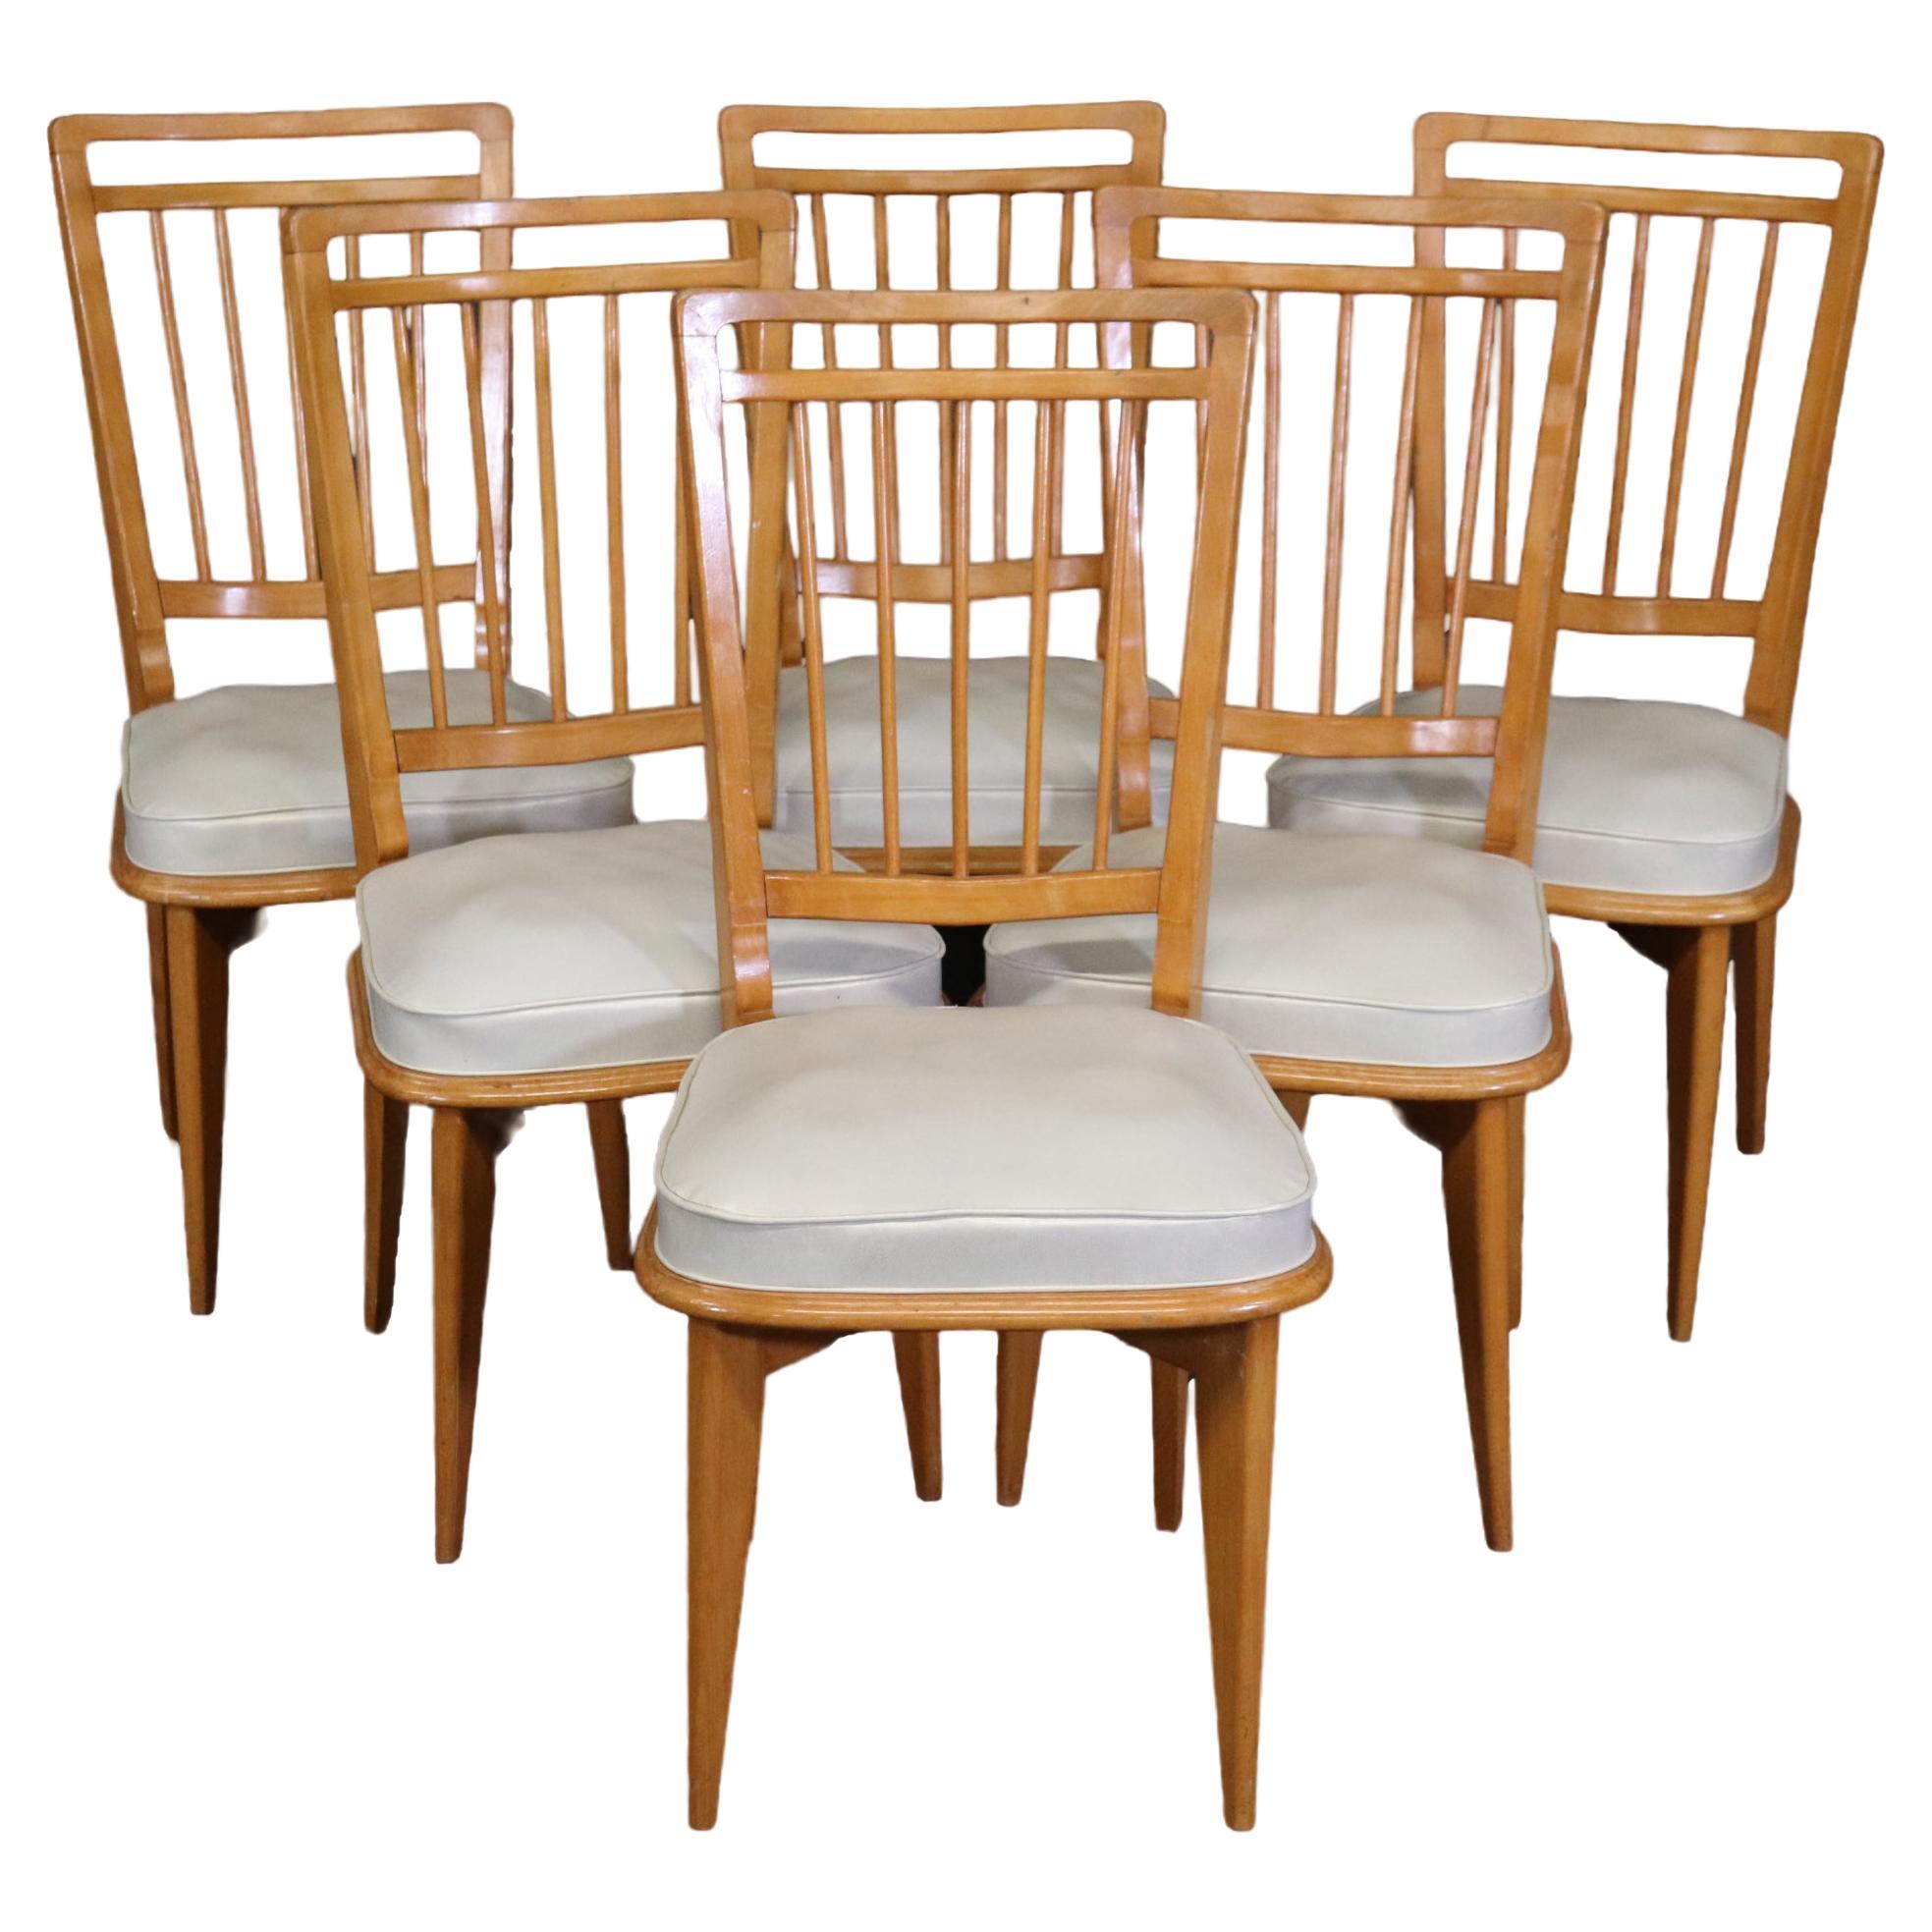 Set of Six Solid Sycamore Andre Arbus Style Mid Century Modern Dining Chairs